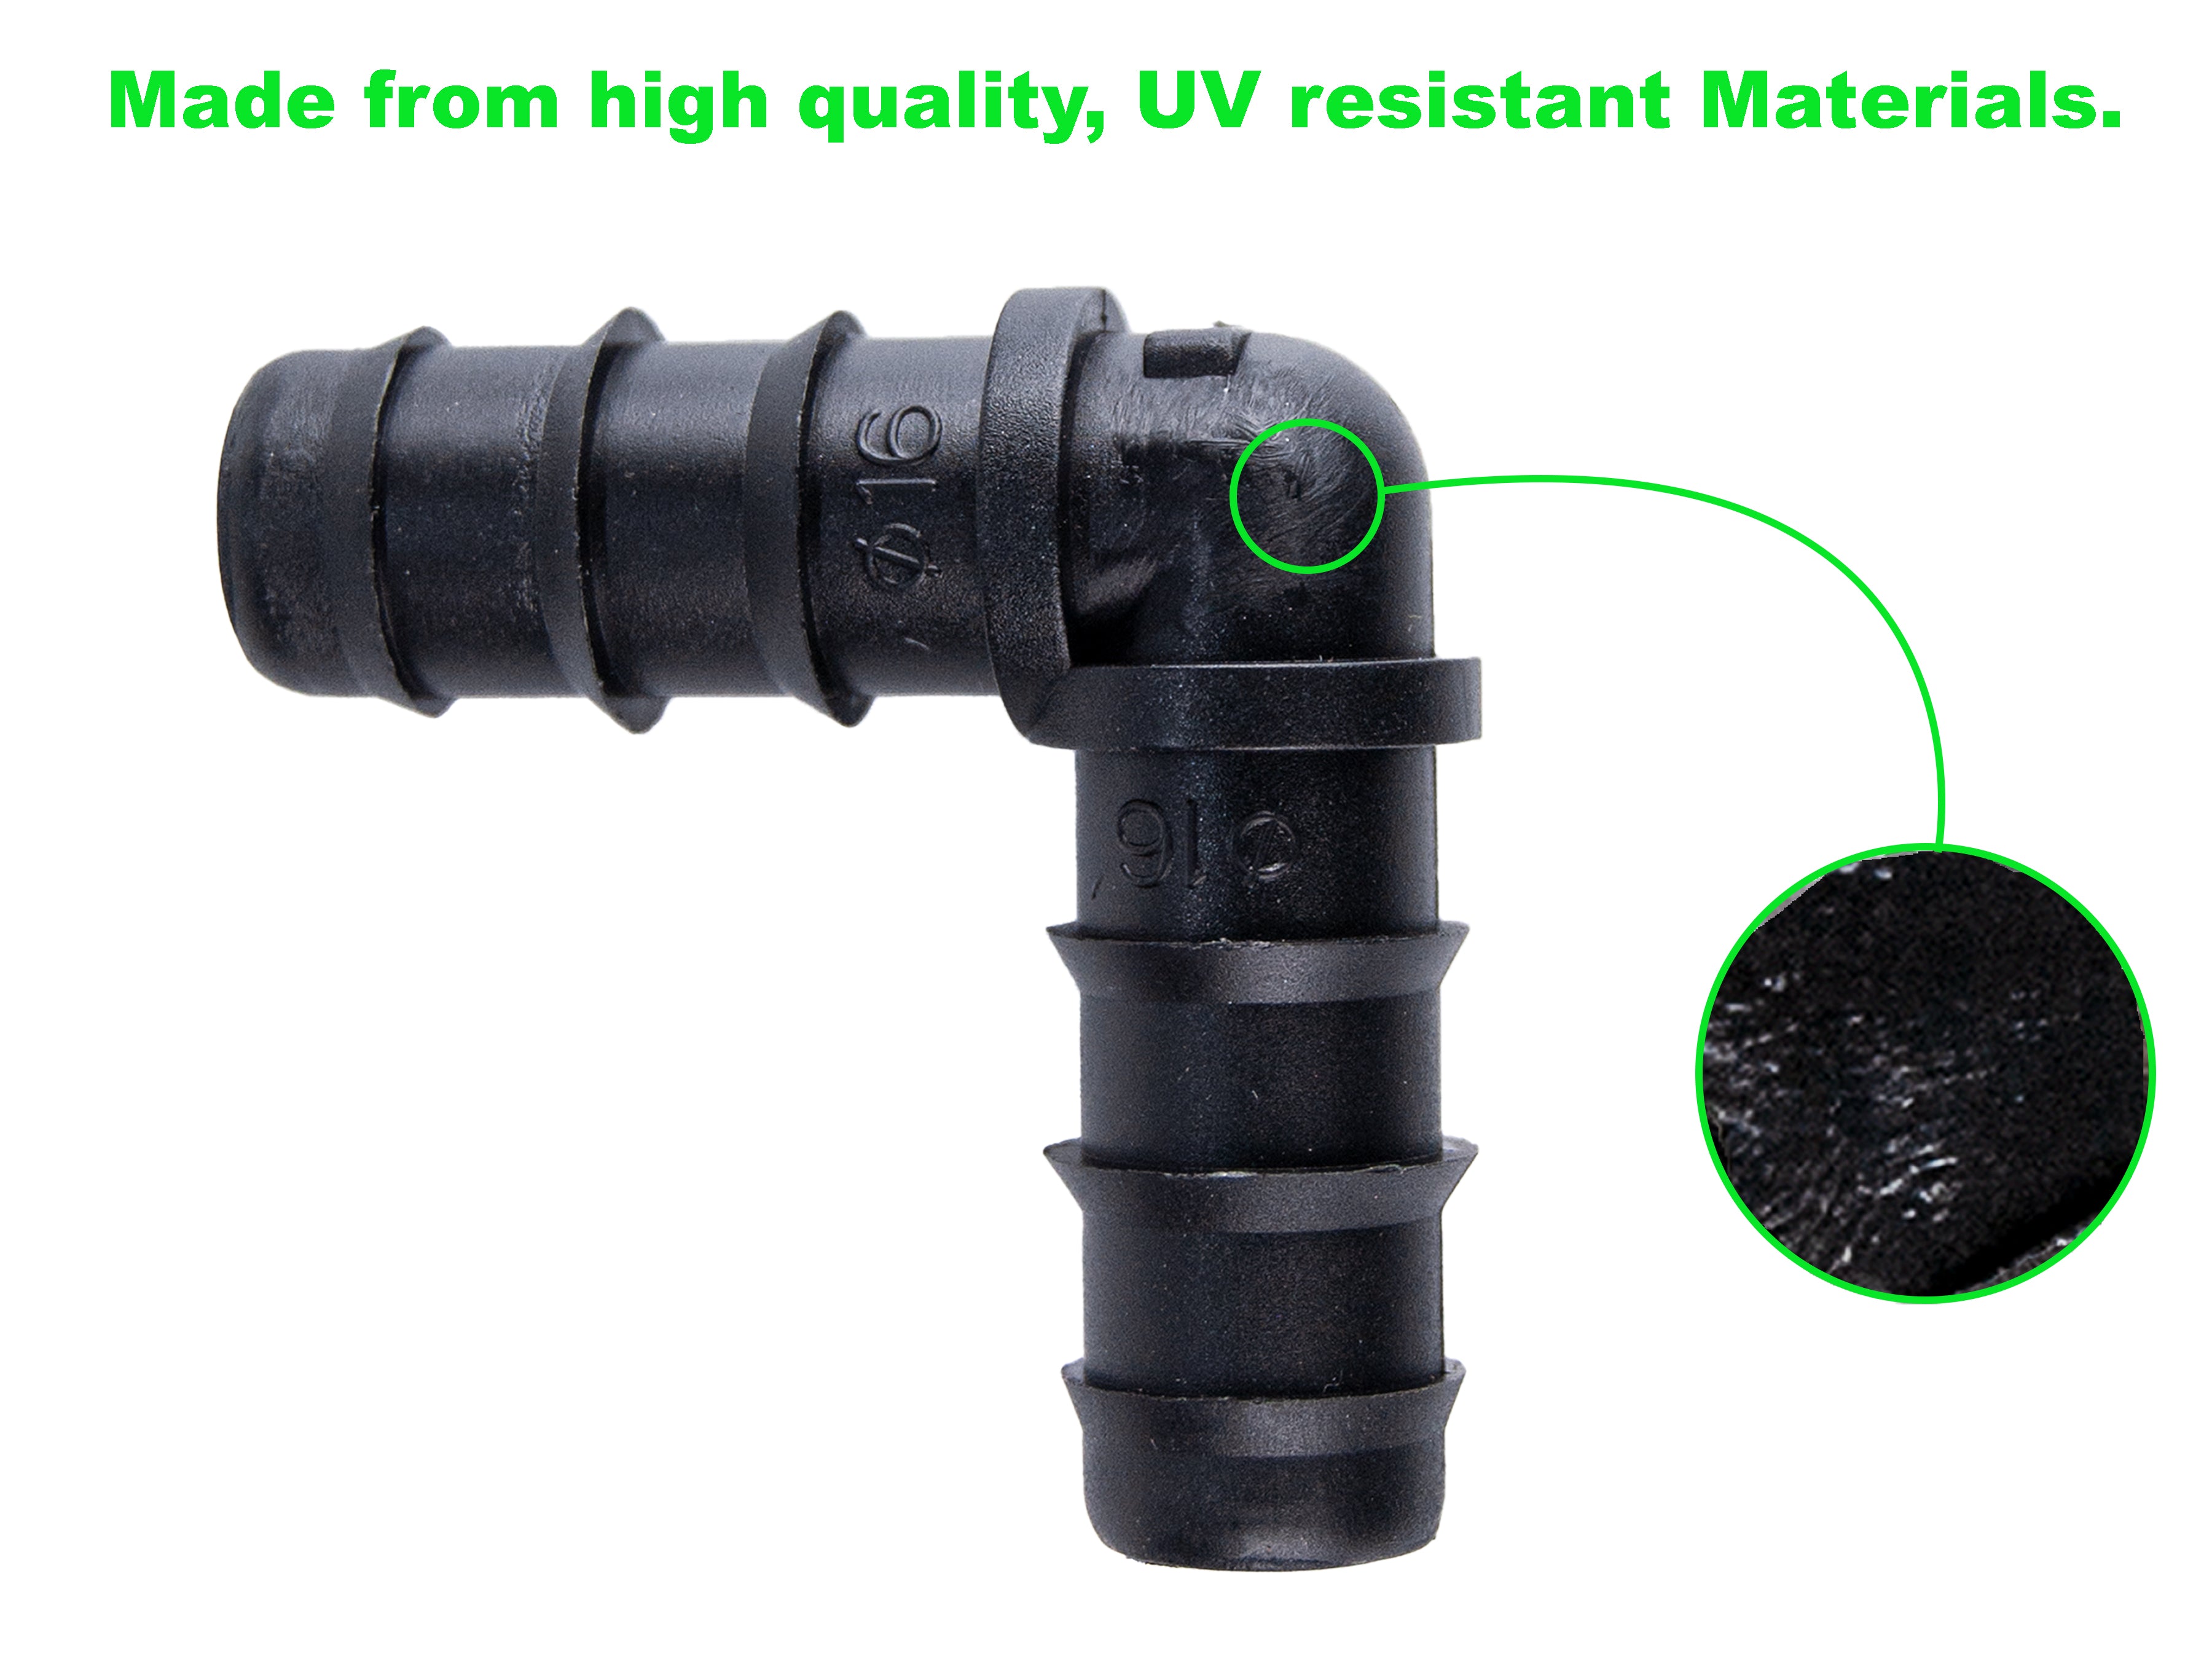 Viagrow 1/2 in. Elbow Barbed Connector Irrigation Fitting, Black, 50 Pack, Case of 6